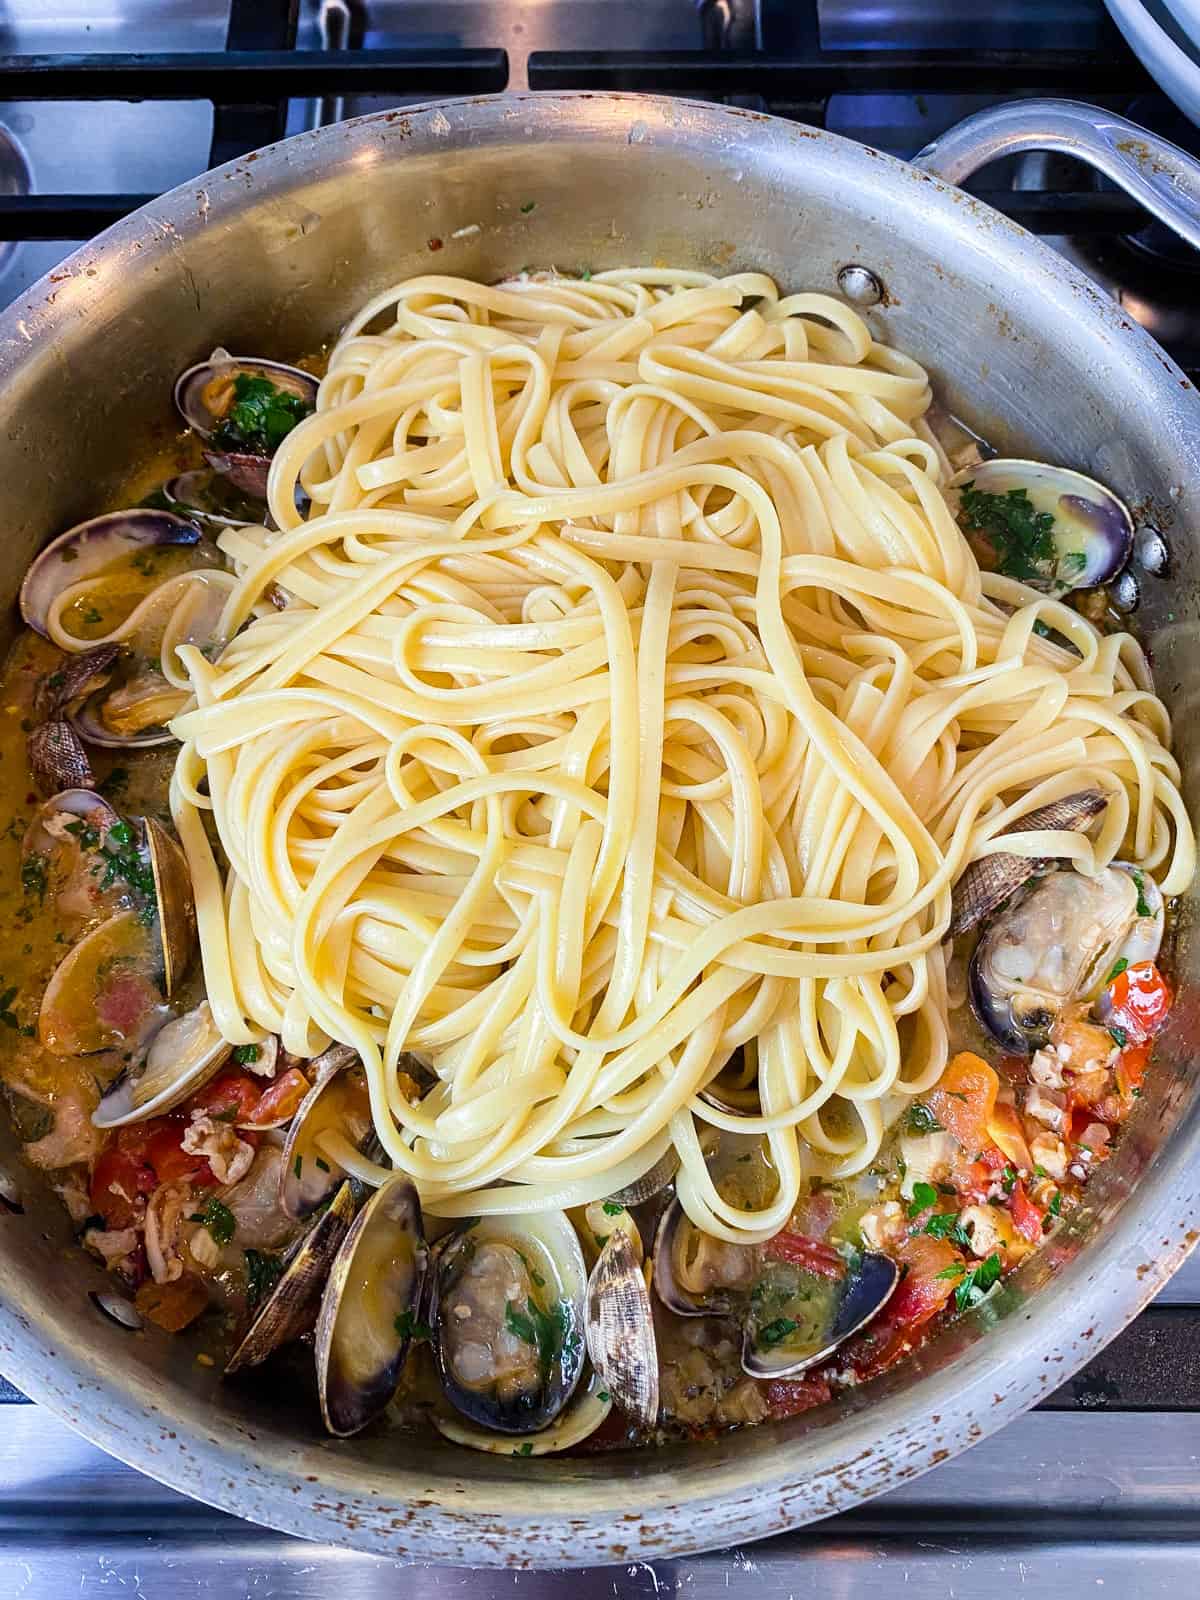 Add the cooked pasta to the clam pasta.